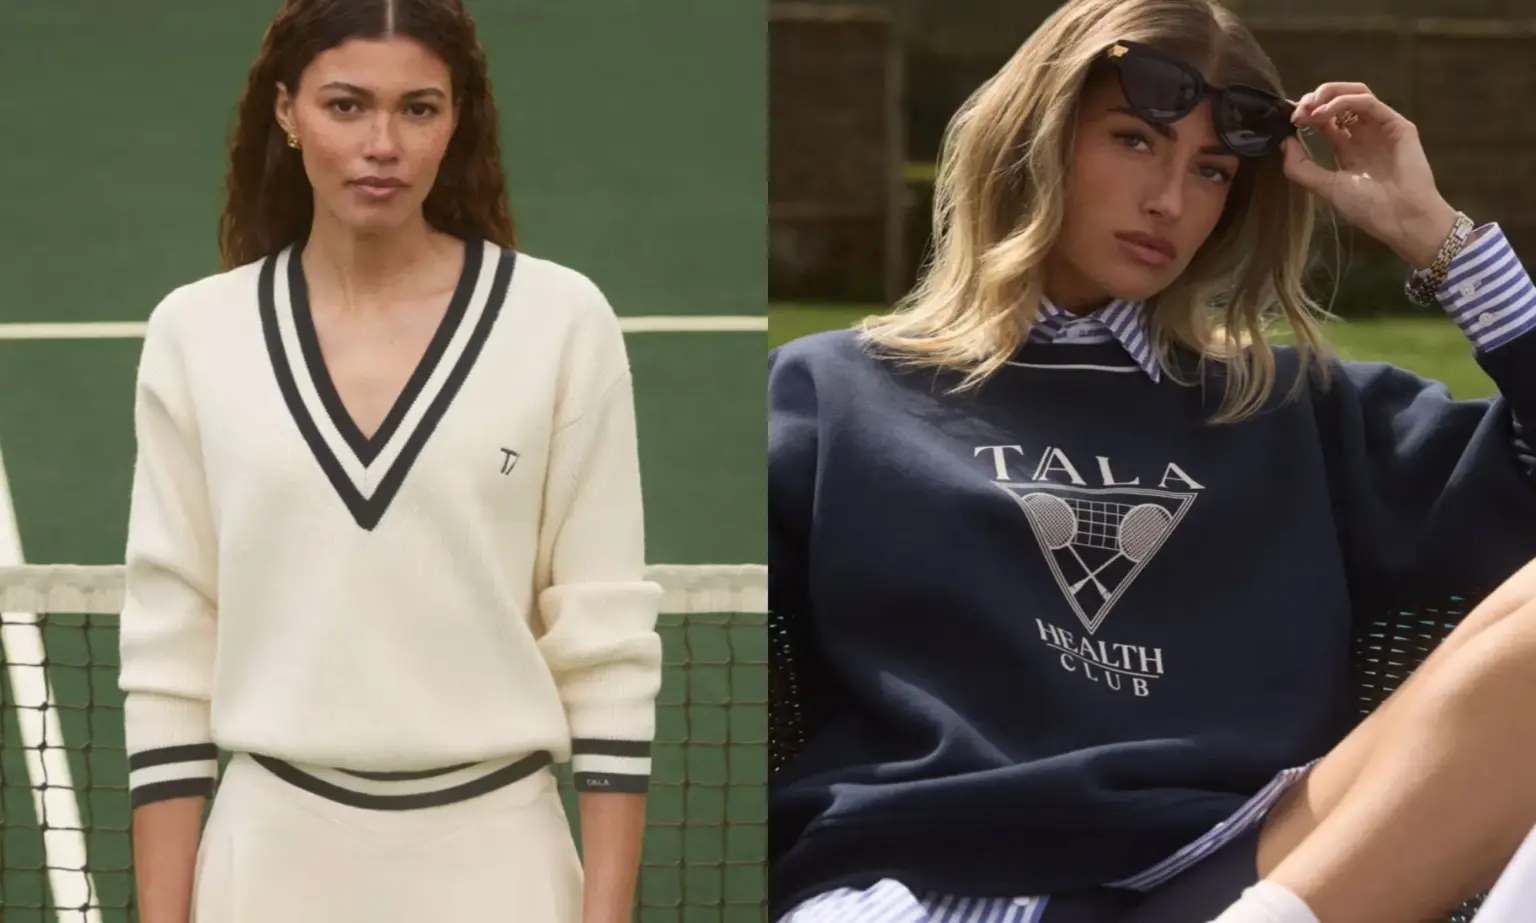 TALA releases new tennis-core collection just in time for Challengers